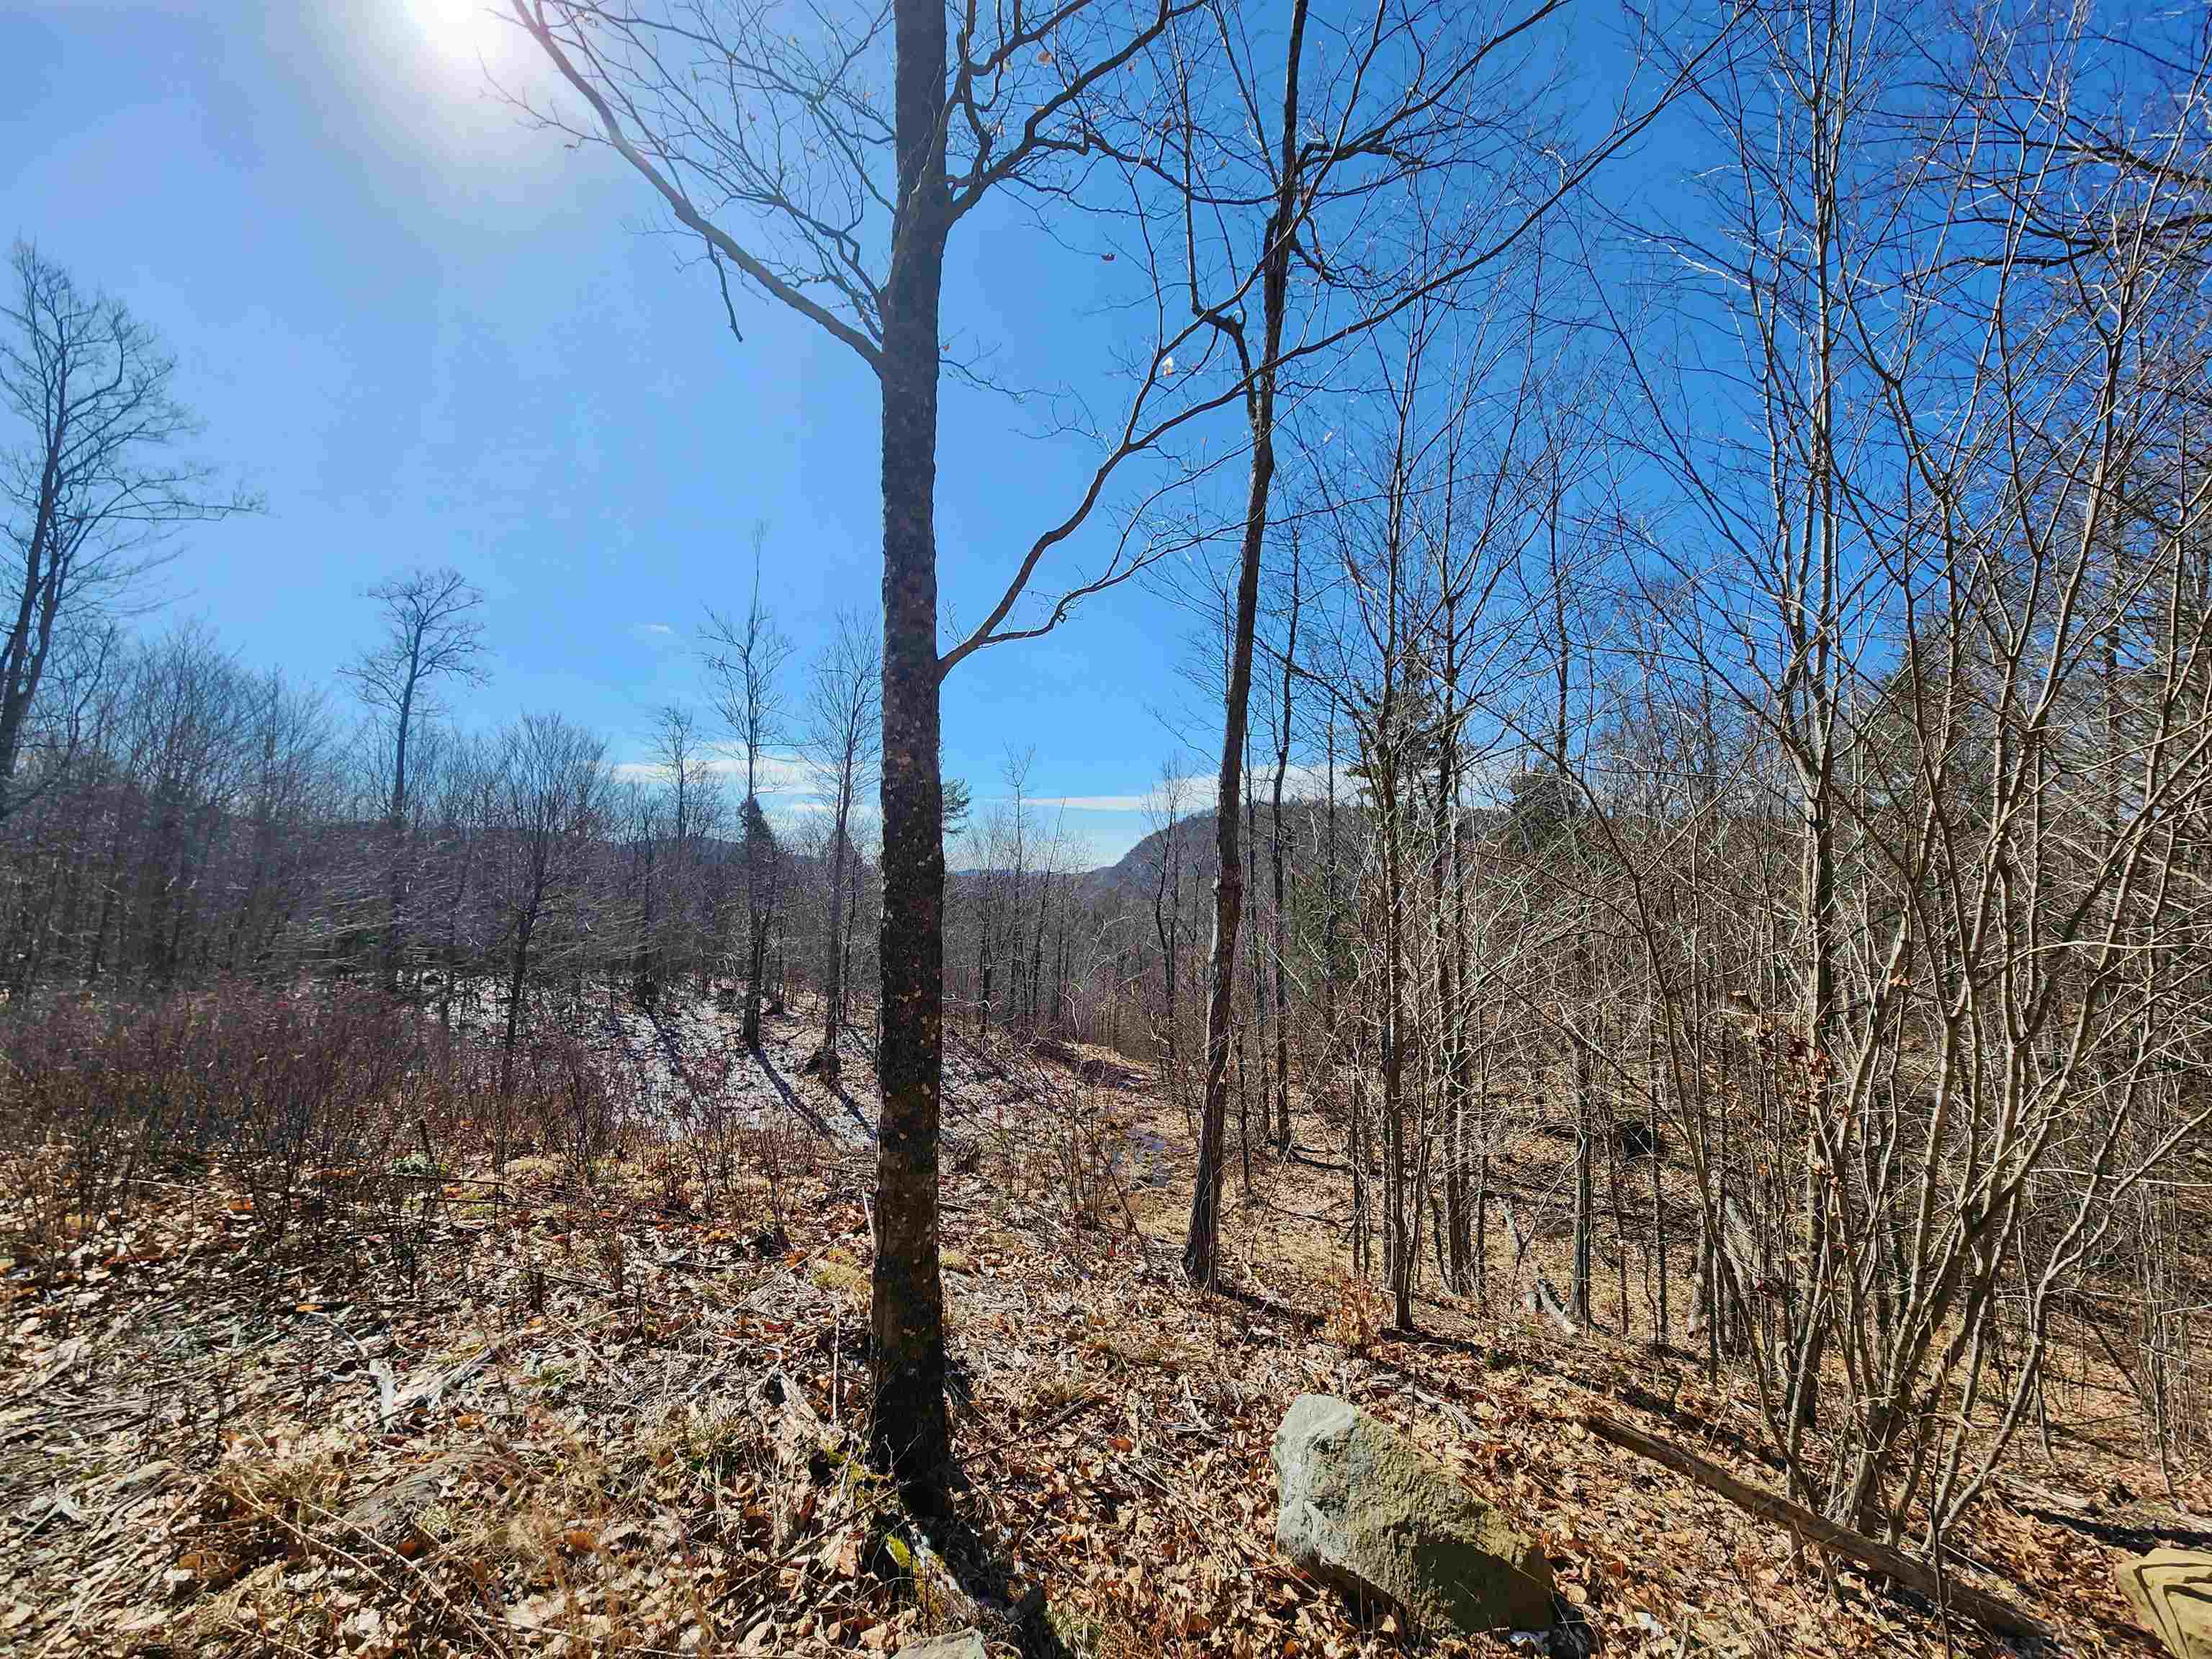 2.561 acres with view potential